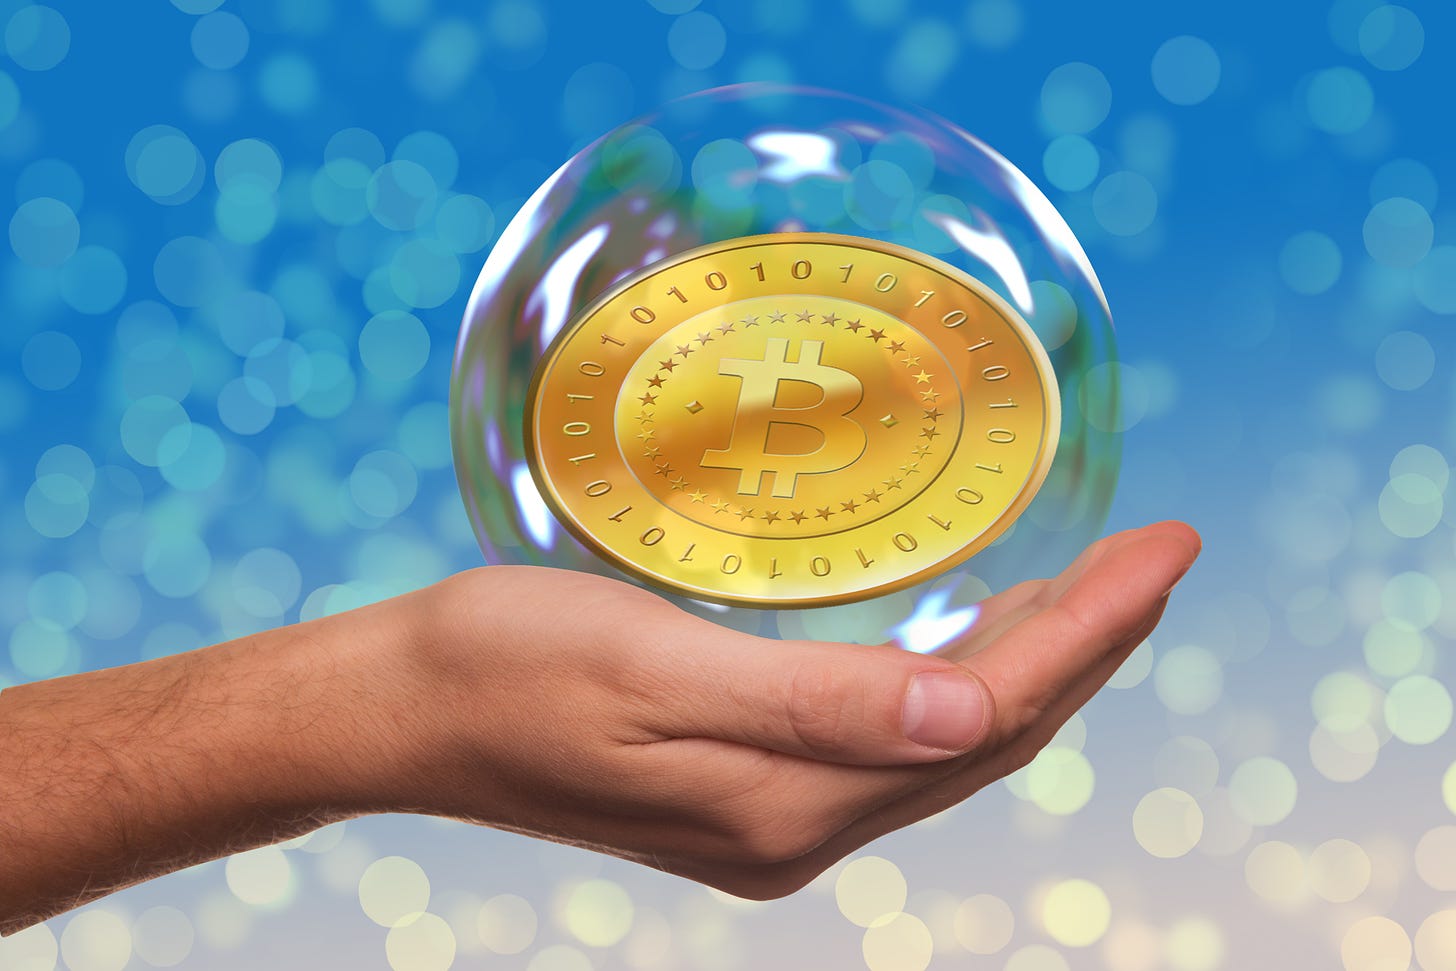 Man holding Bitcoin in a Bubble